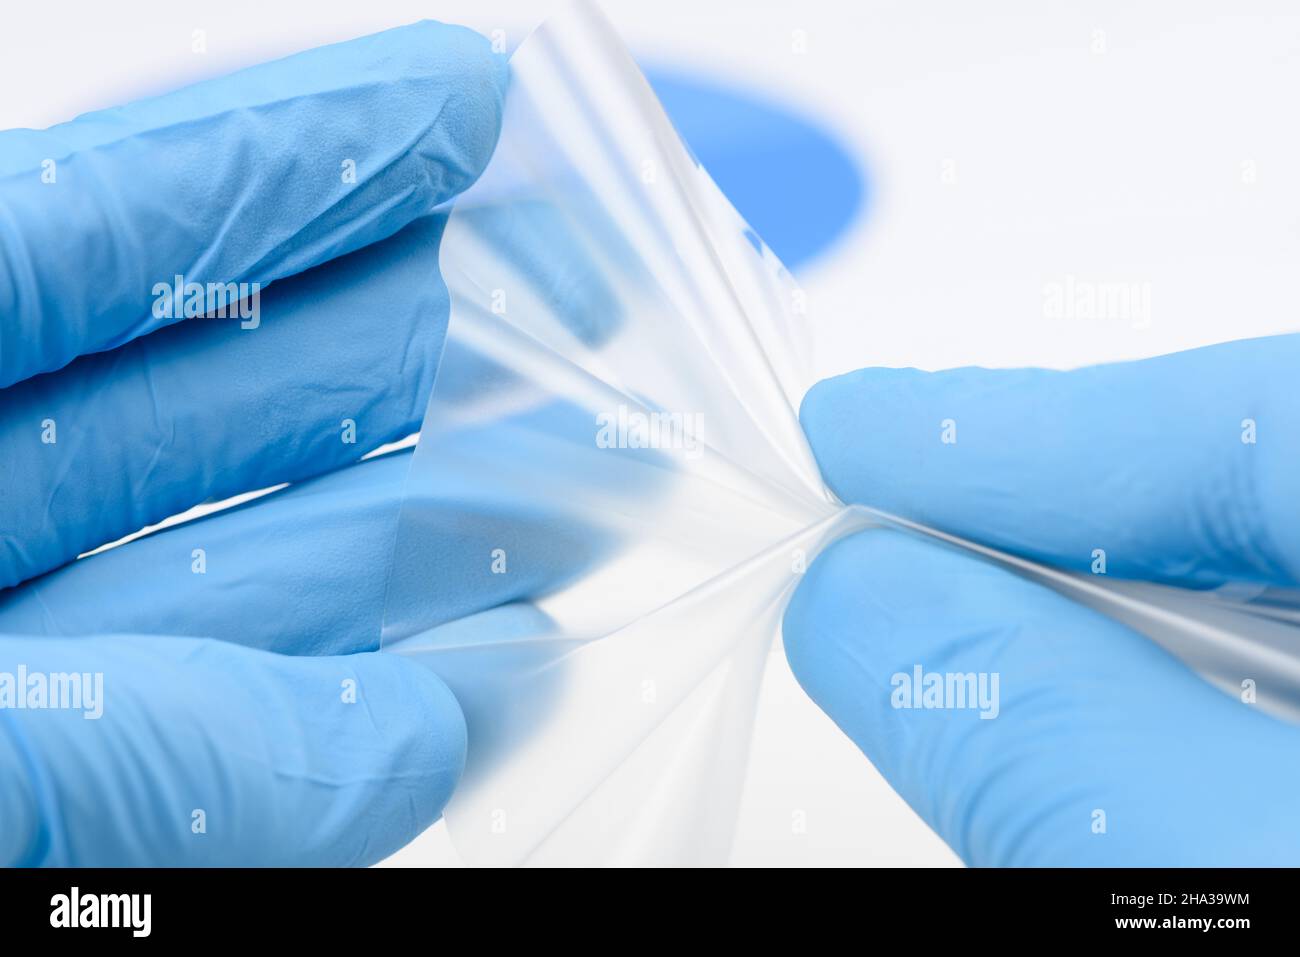 Researcher hold and bend flexible transparent plastic like thin film material in laboratory. Concept of discovery for material with new properties. Stock Photo